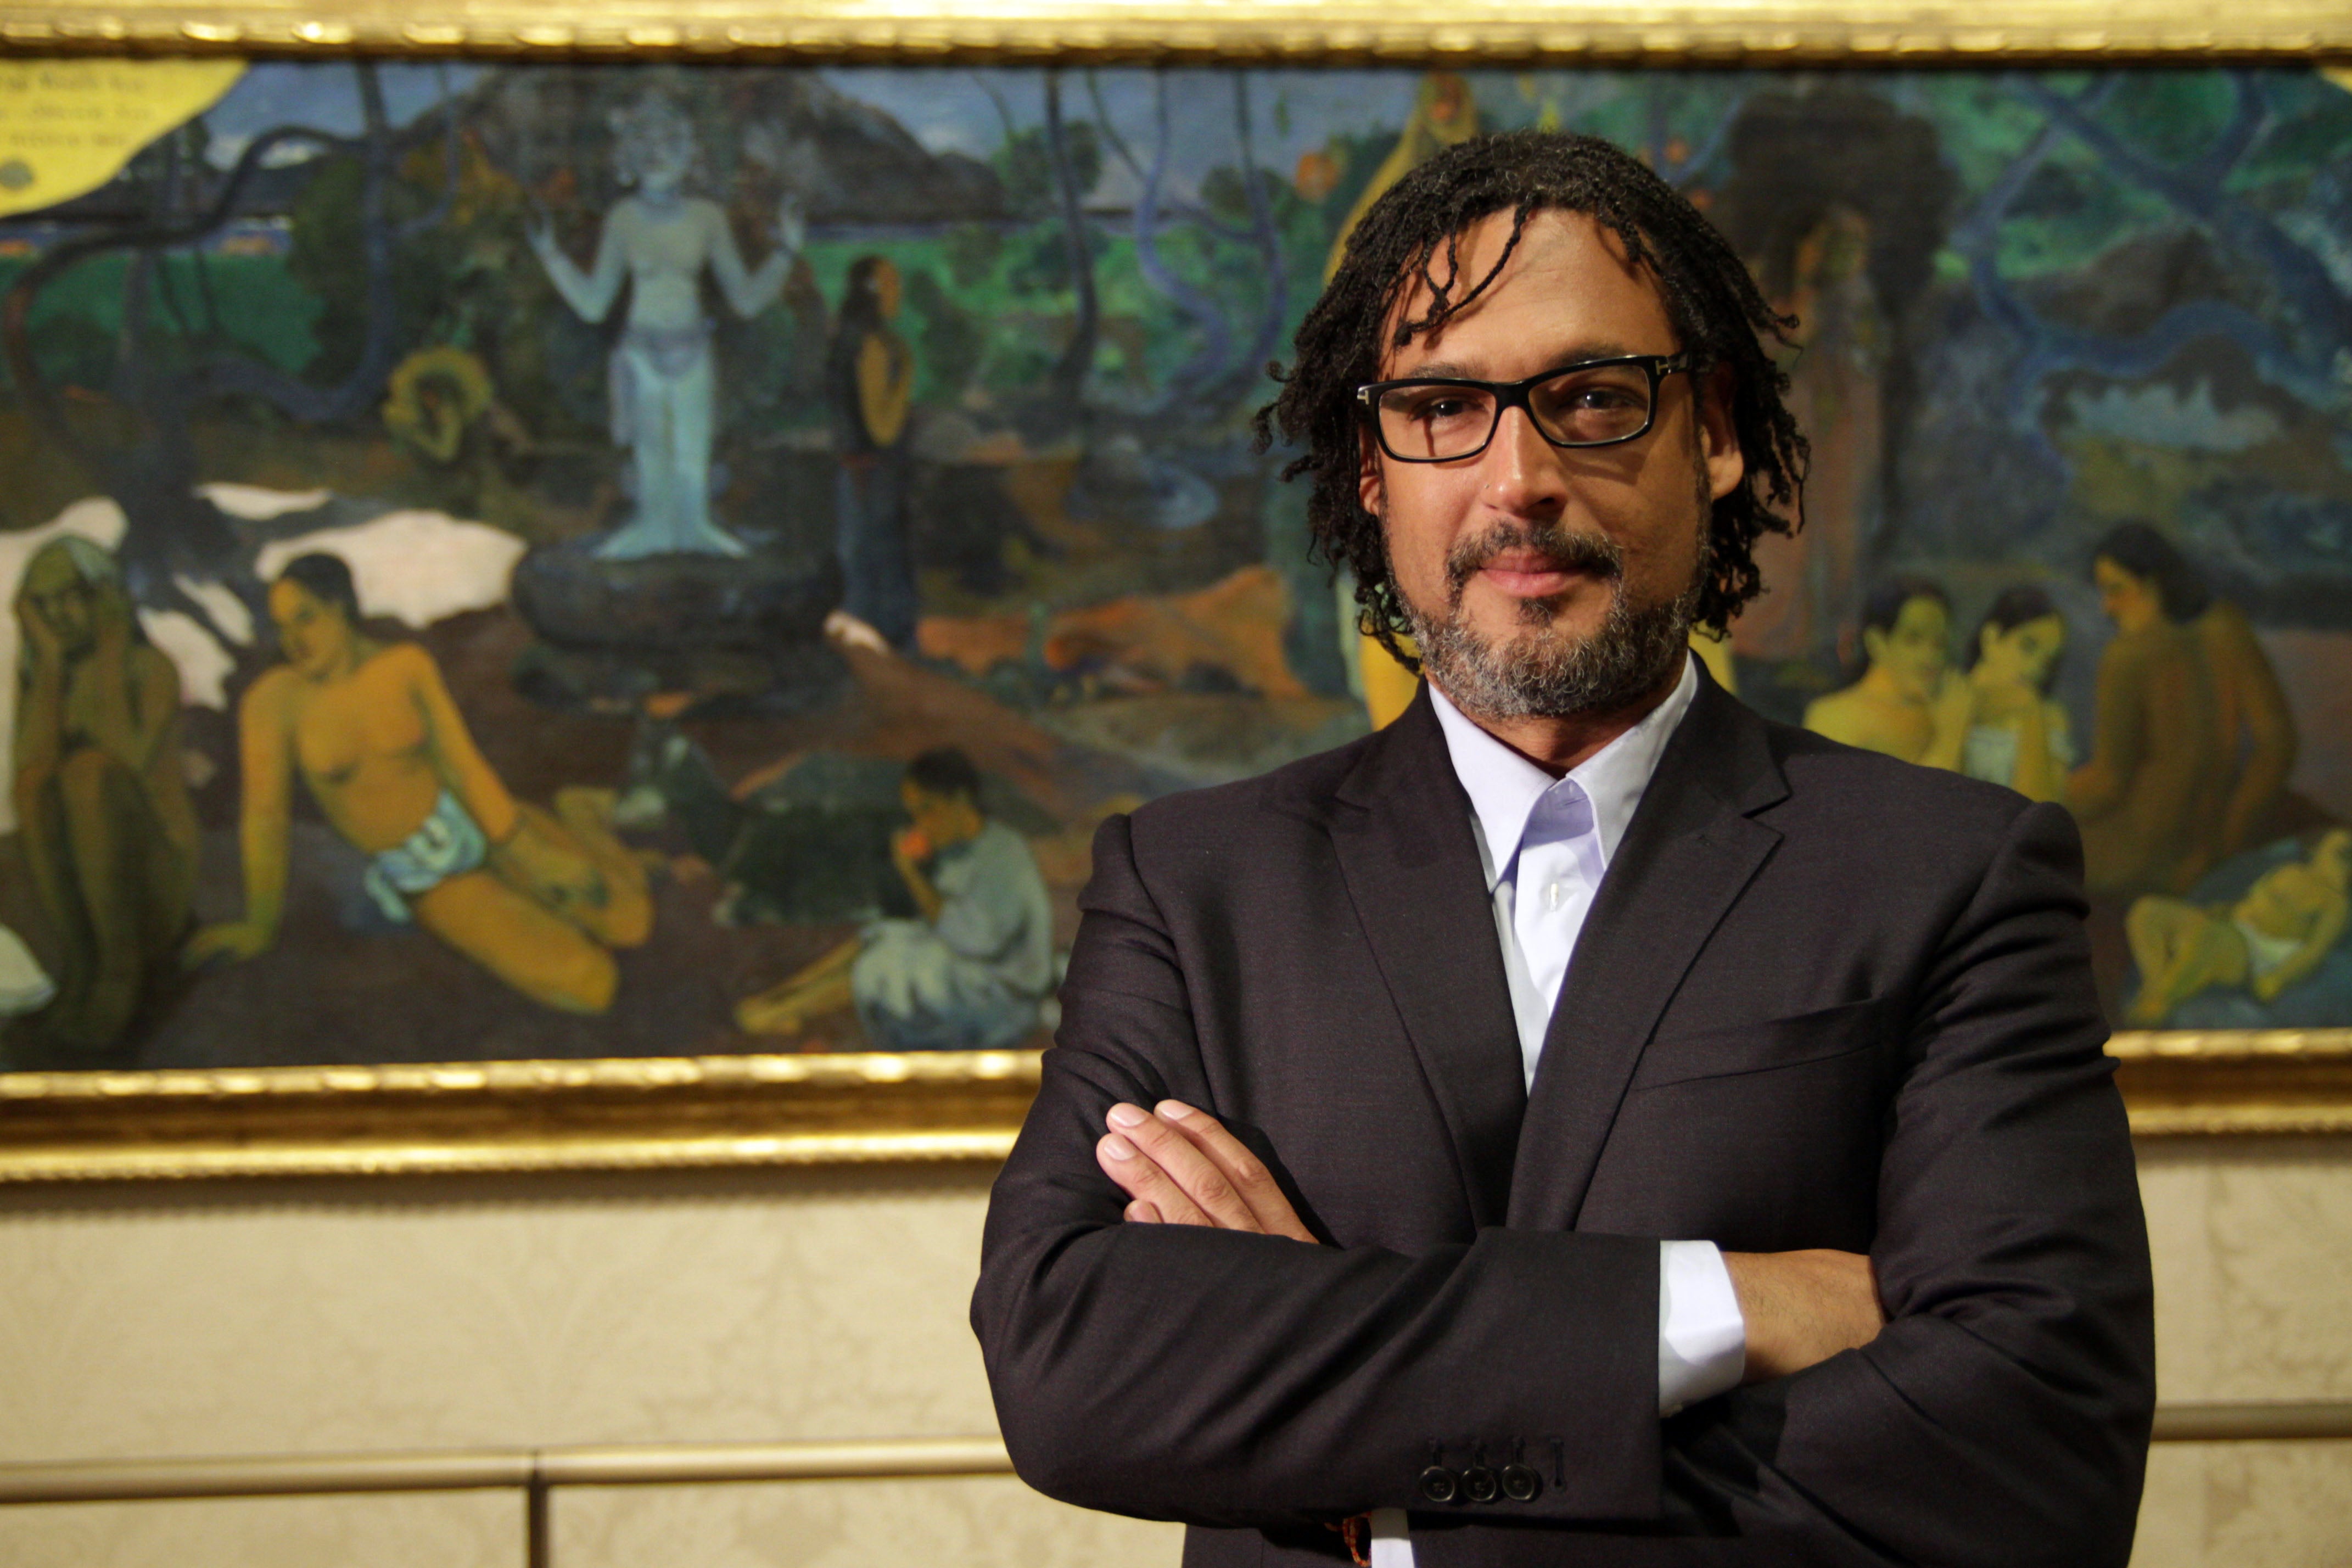 Ptof David Olusoga explained the history of slavery to jurors at Bristol Crown Court (Nutopia/BBC)